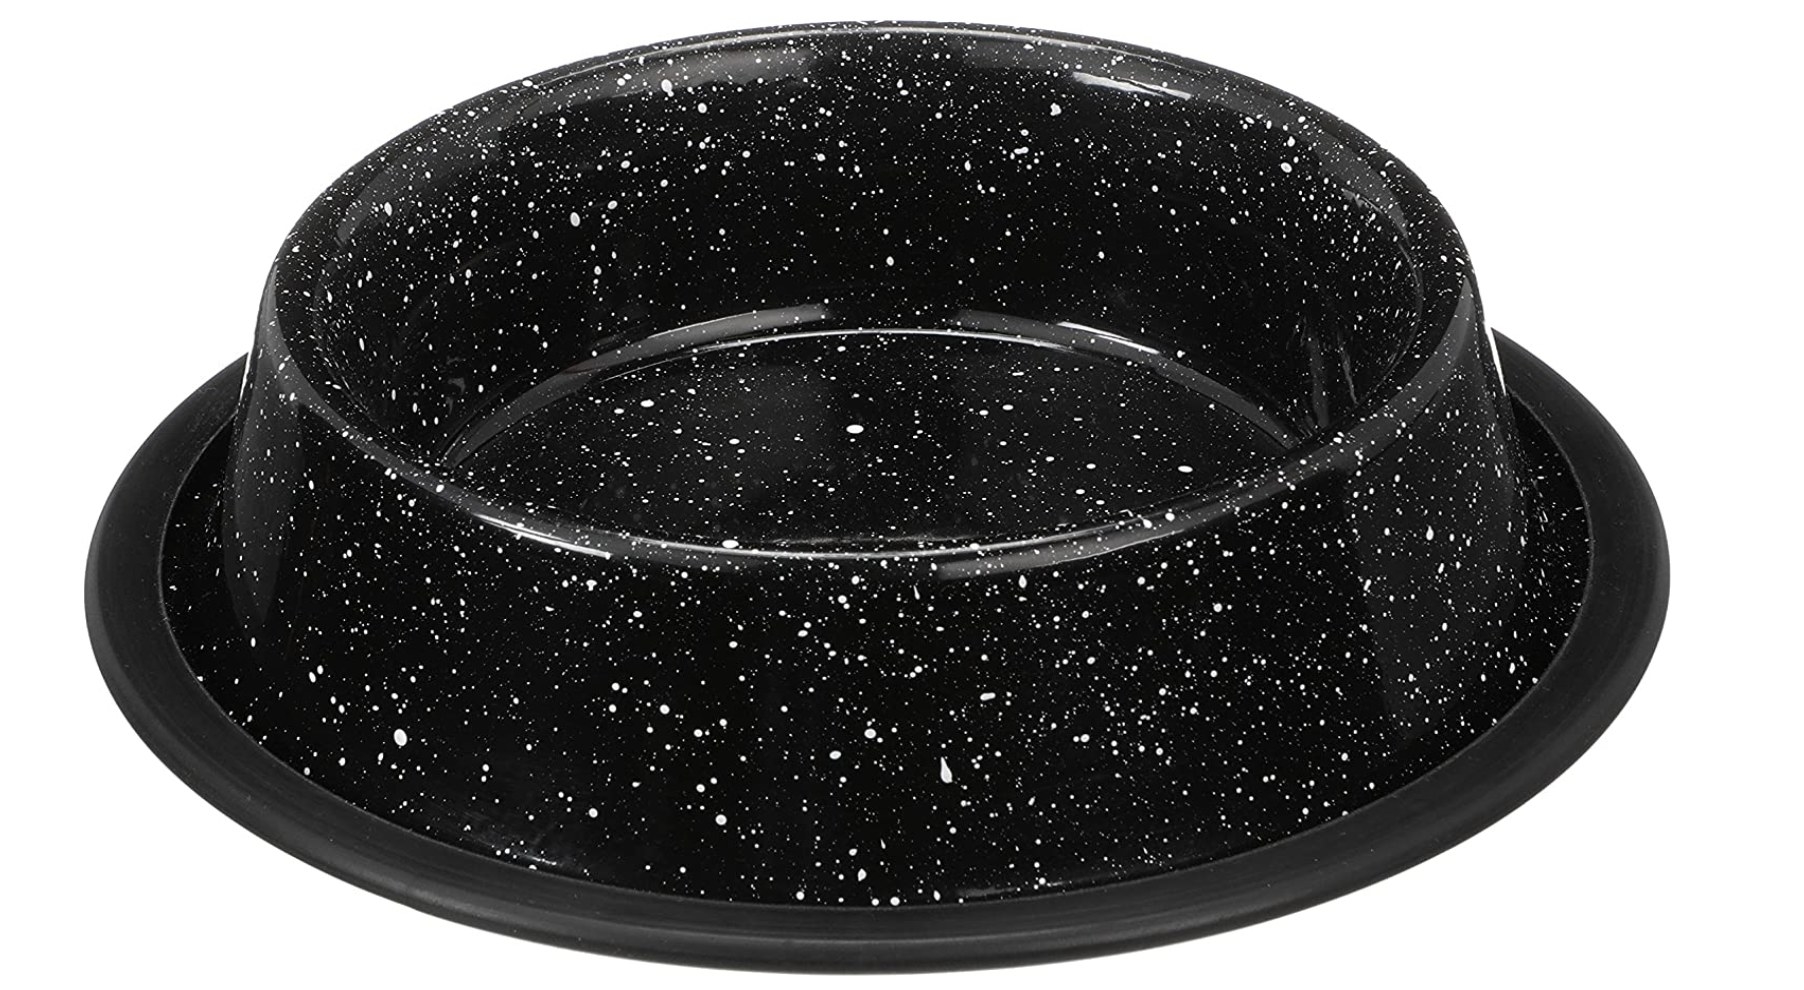 A round black metal bowl with white speckling